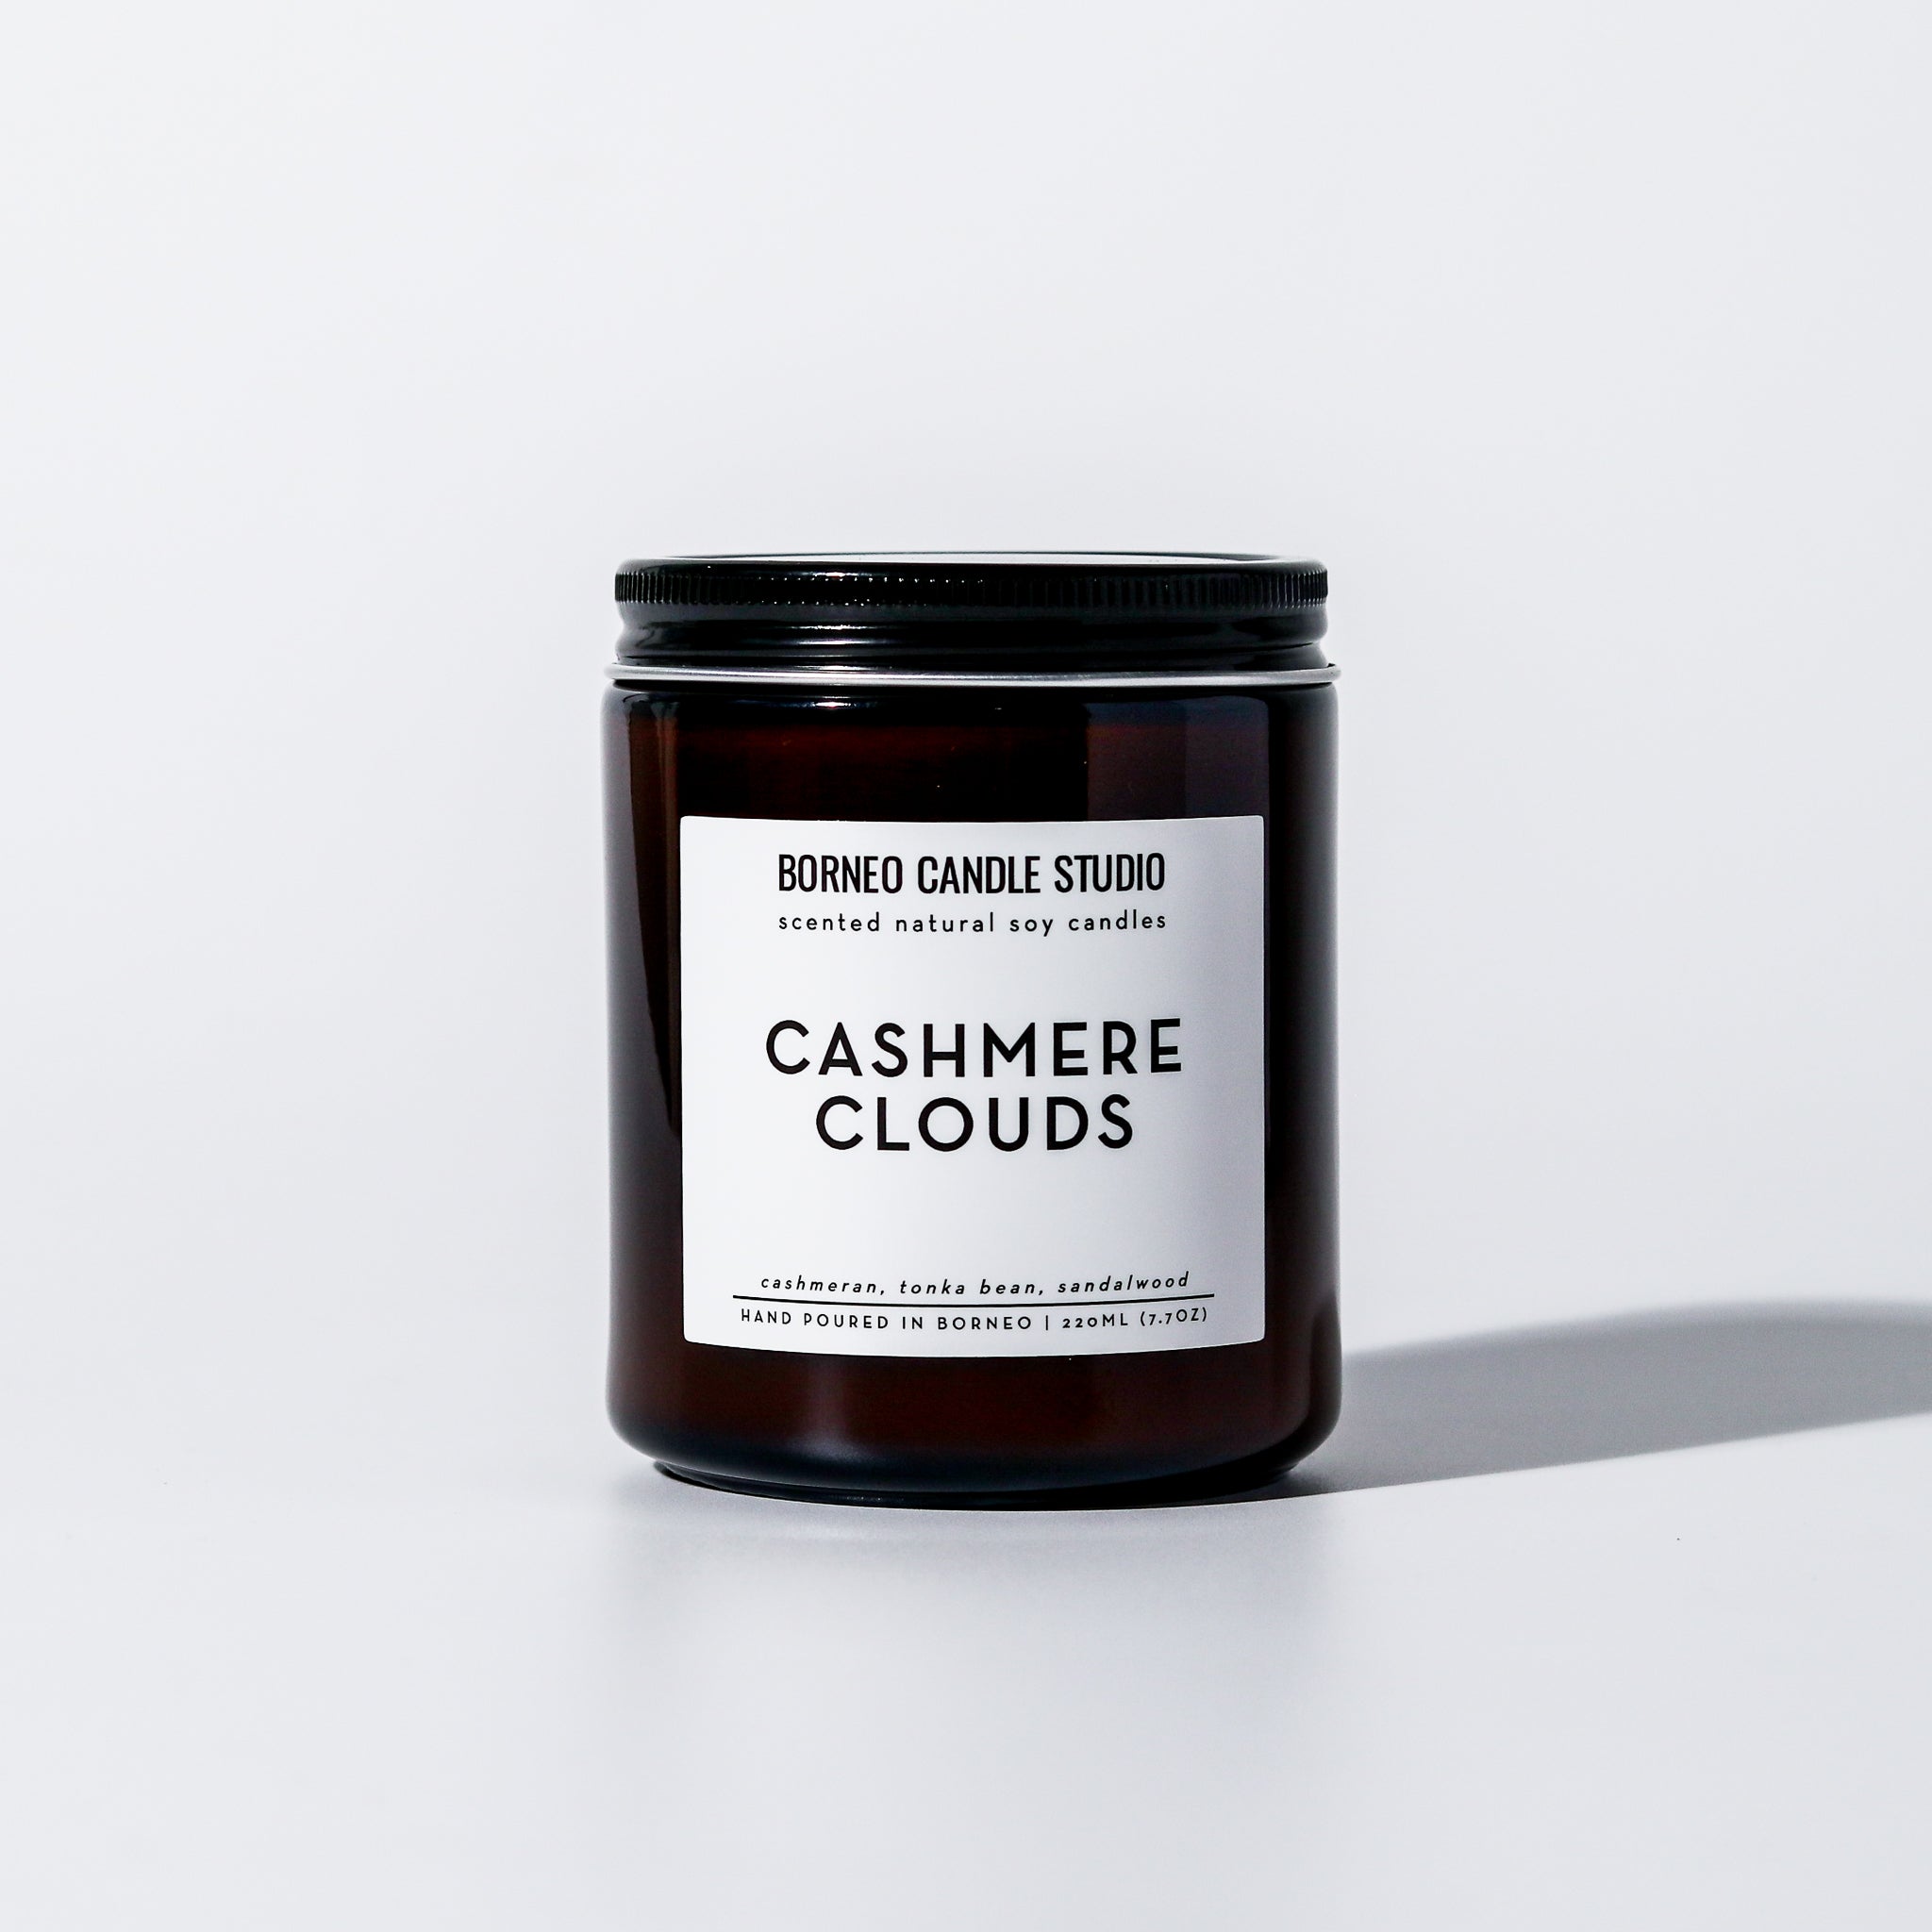 Cashmere Clouds Soy Candle - Borneo Candle Studio